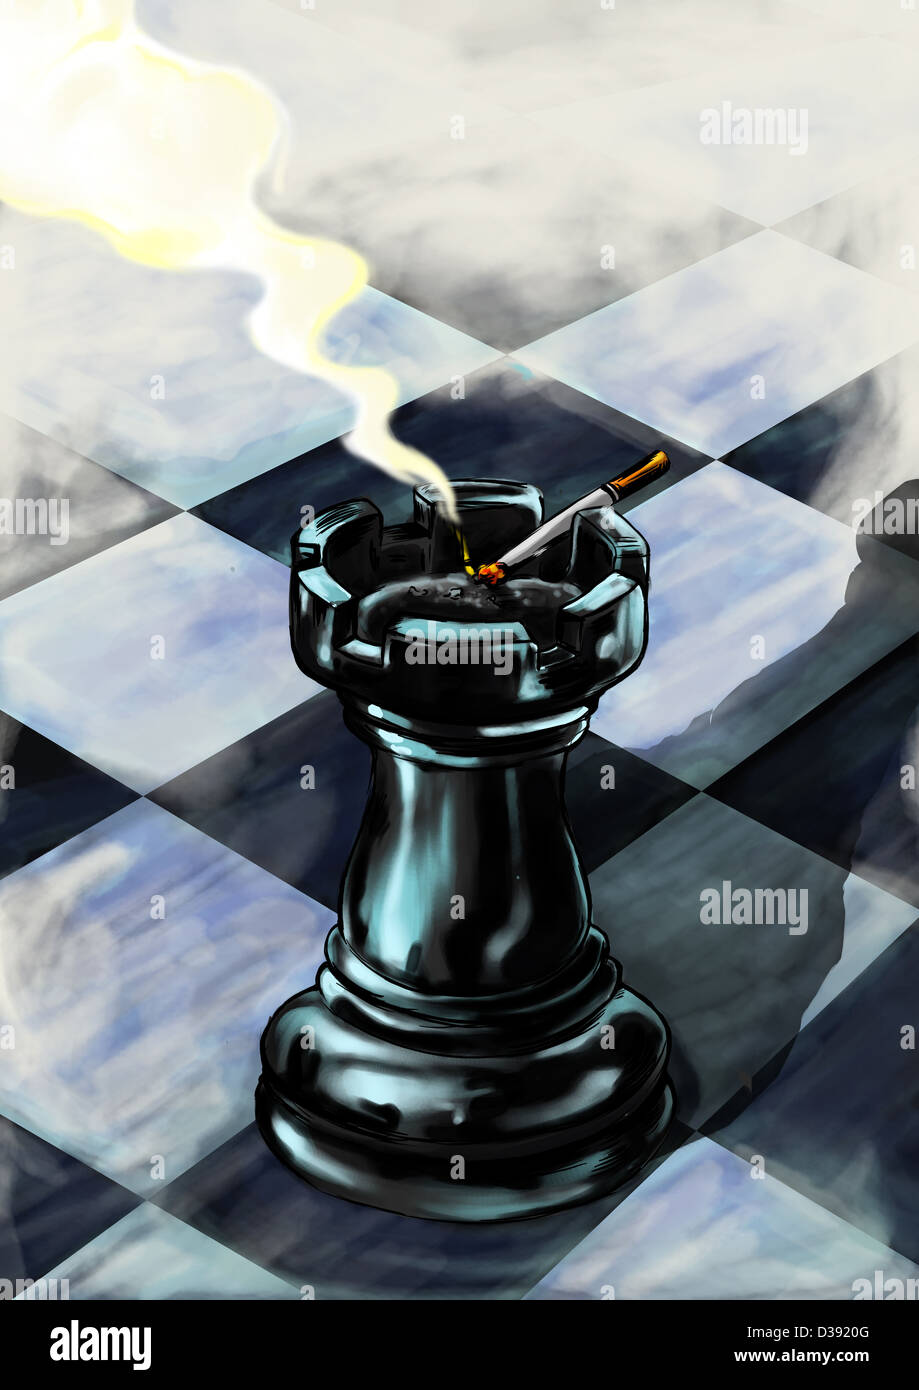 Rook chess piece, illustration - Stock Image - F011/3128 - Science Photo  Library